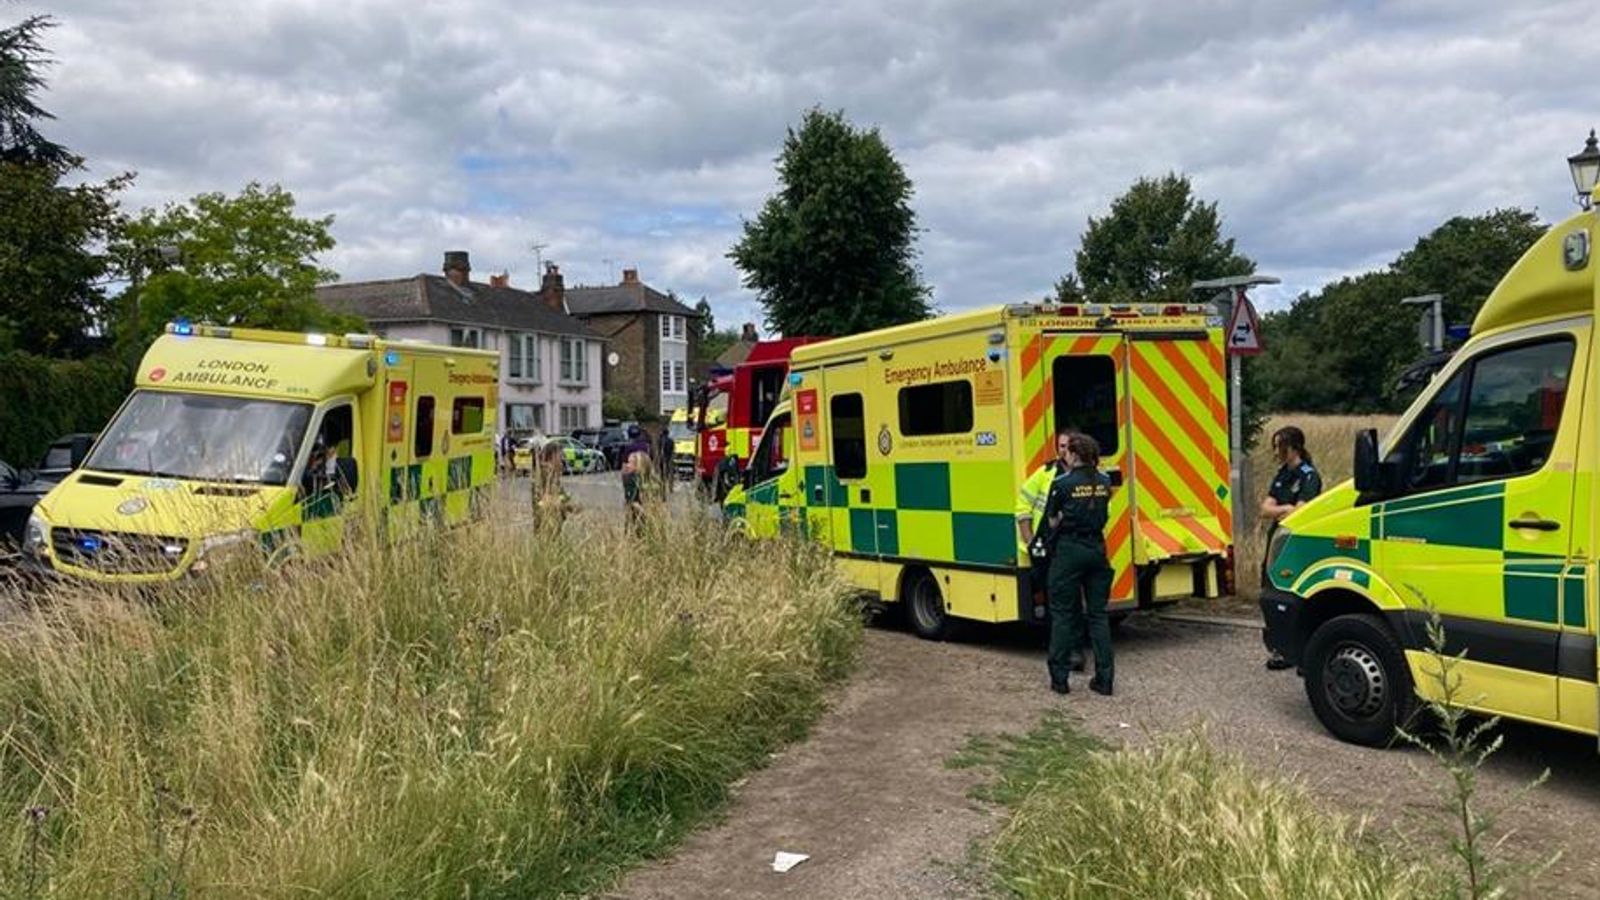 'Absolutely shell-shocked' parents carry limping girl away from Wimbledon school crash scene